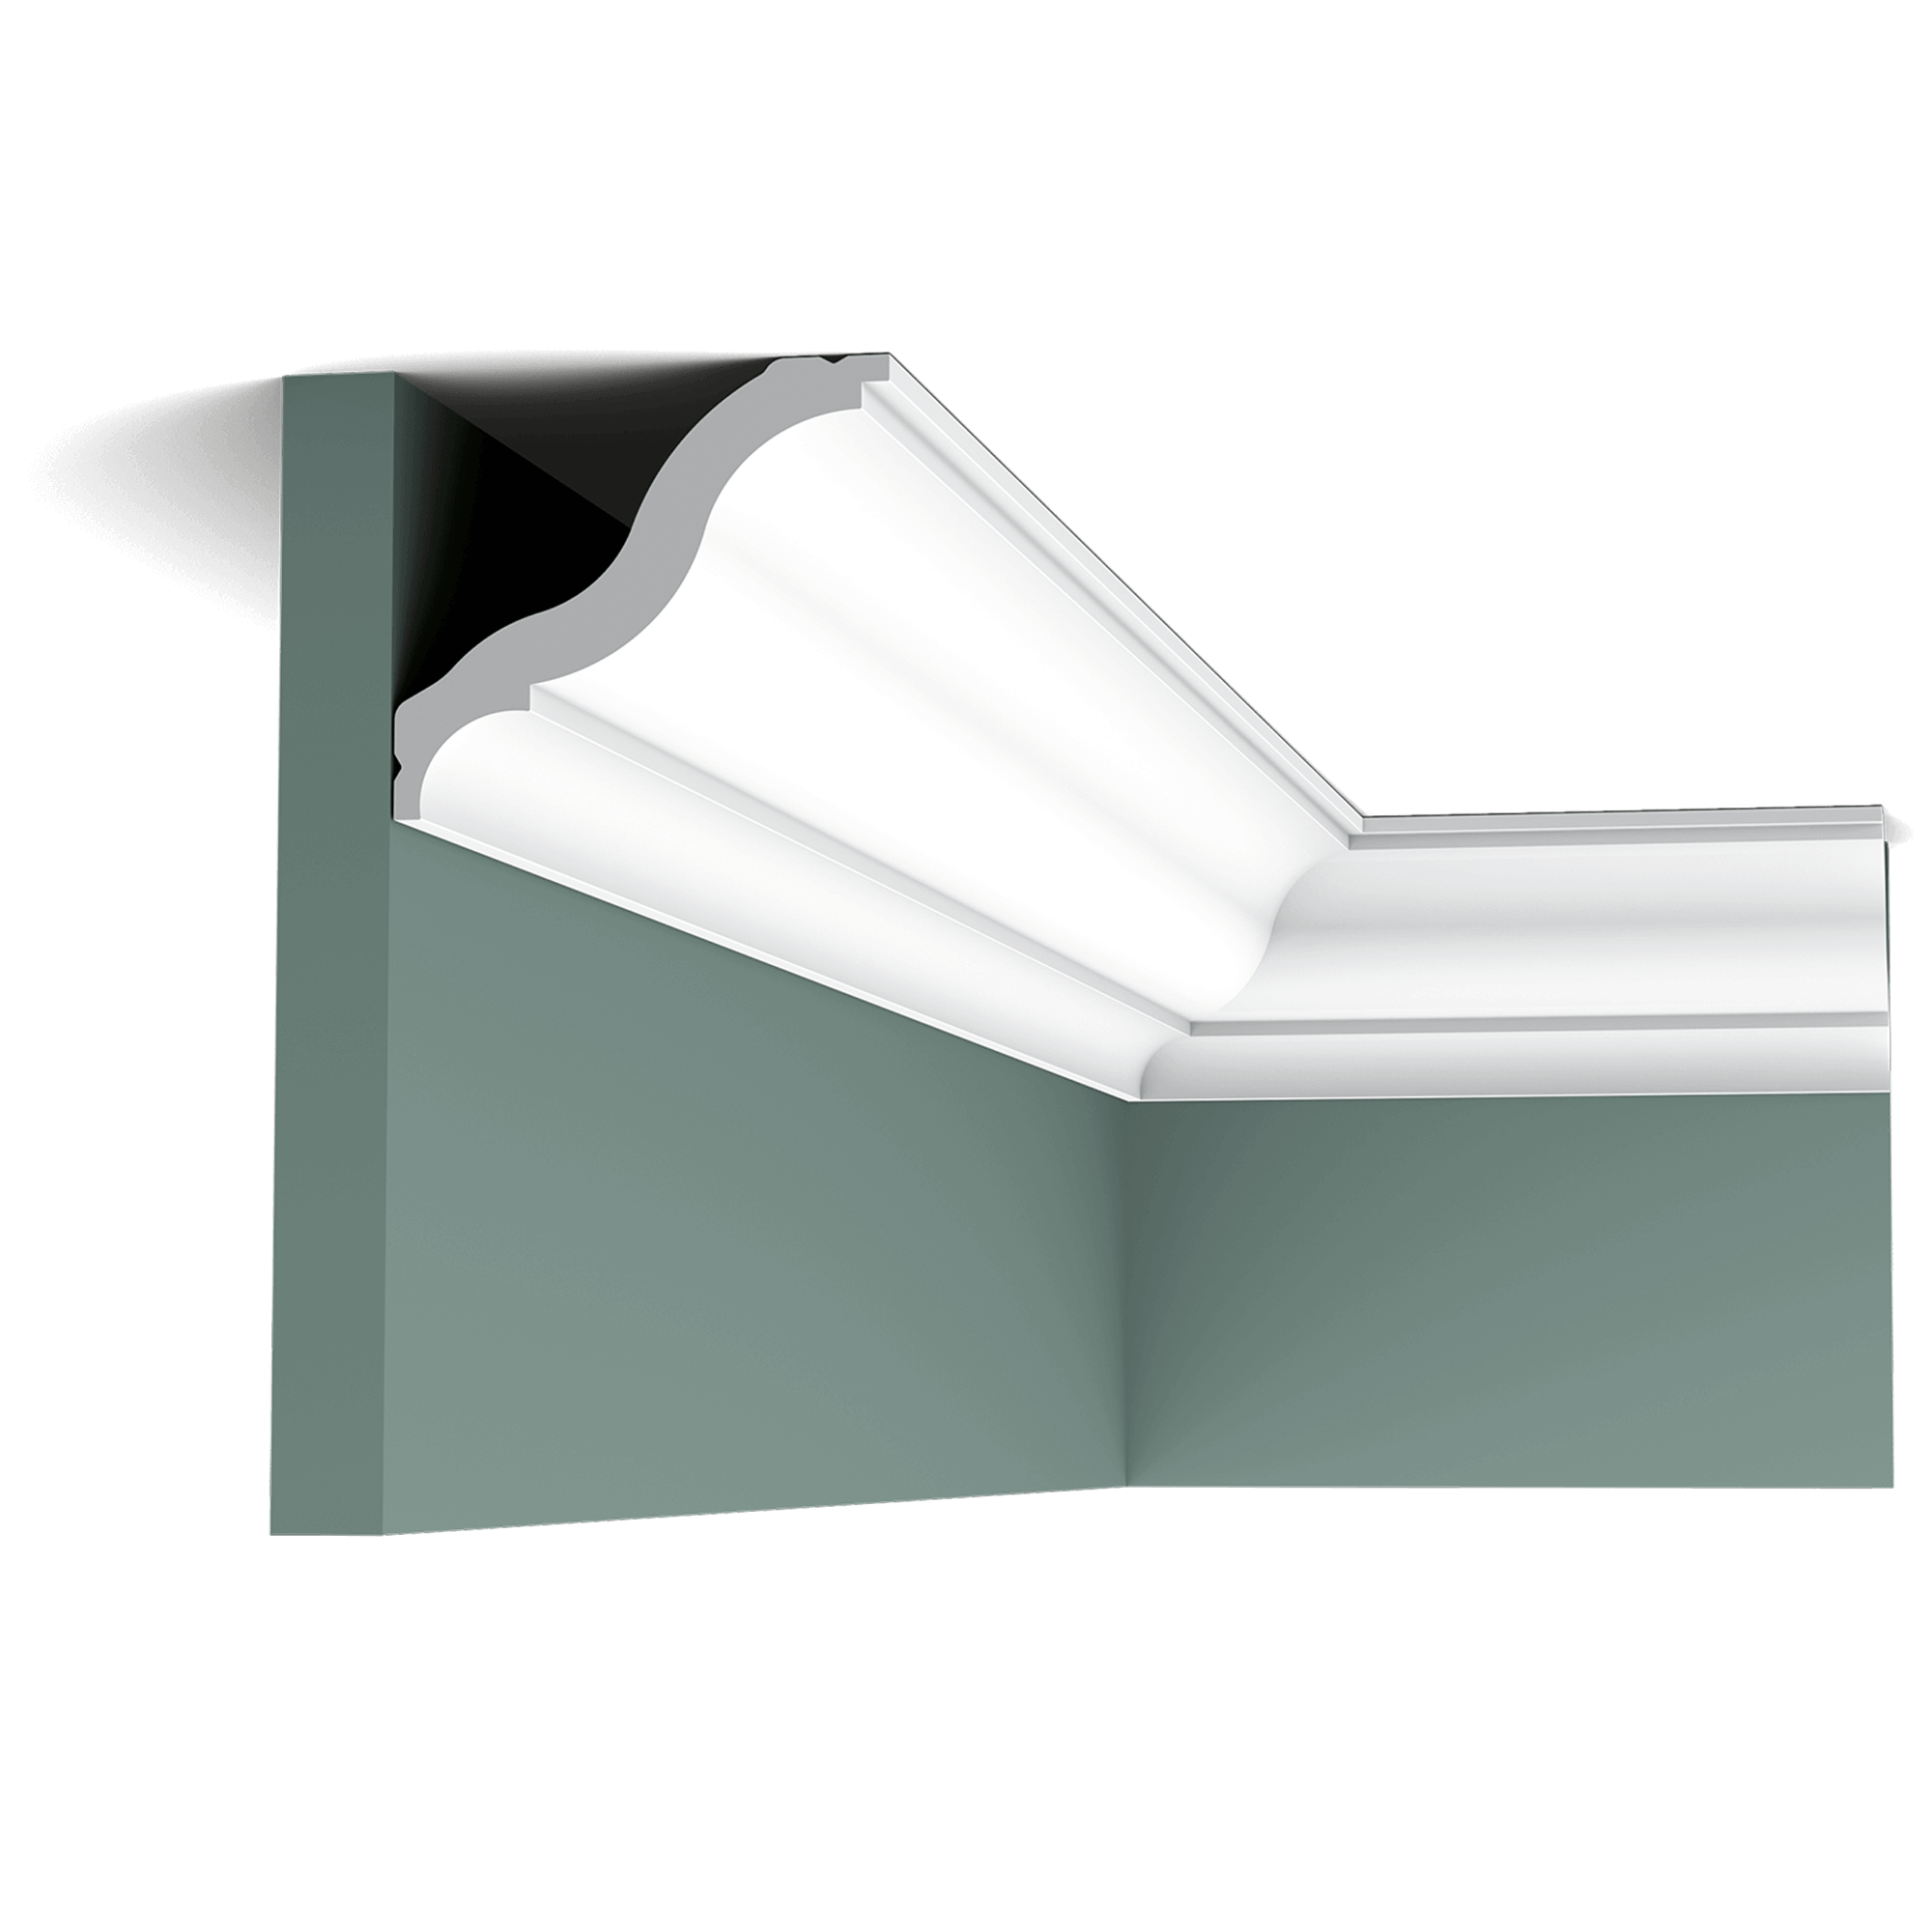 cb503 cornice moulding fa58 Simple basic profile with graceful curves. Fits any decorating style seamlessly.